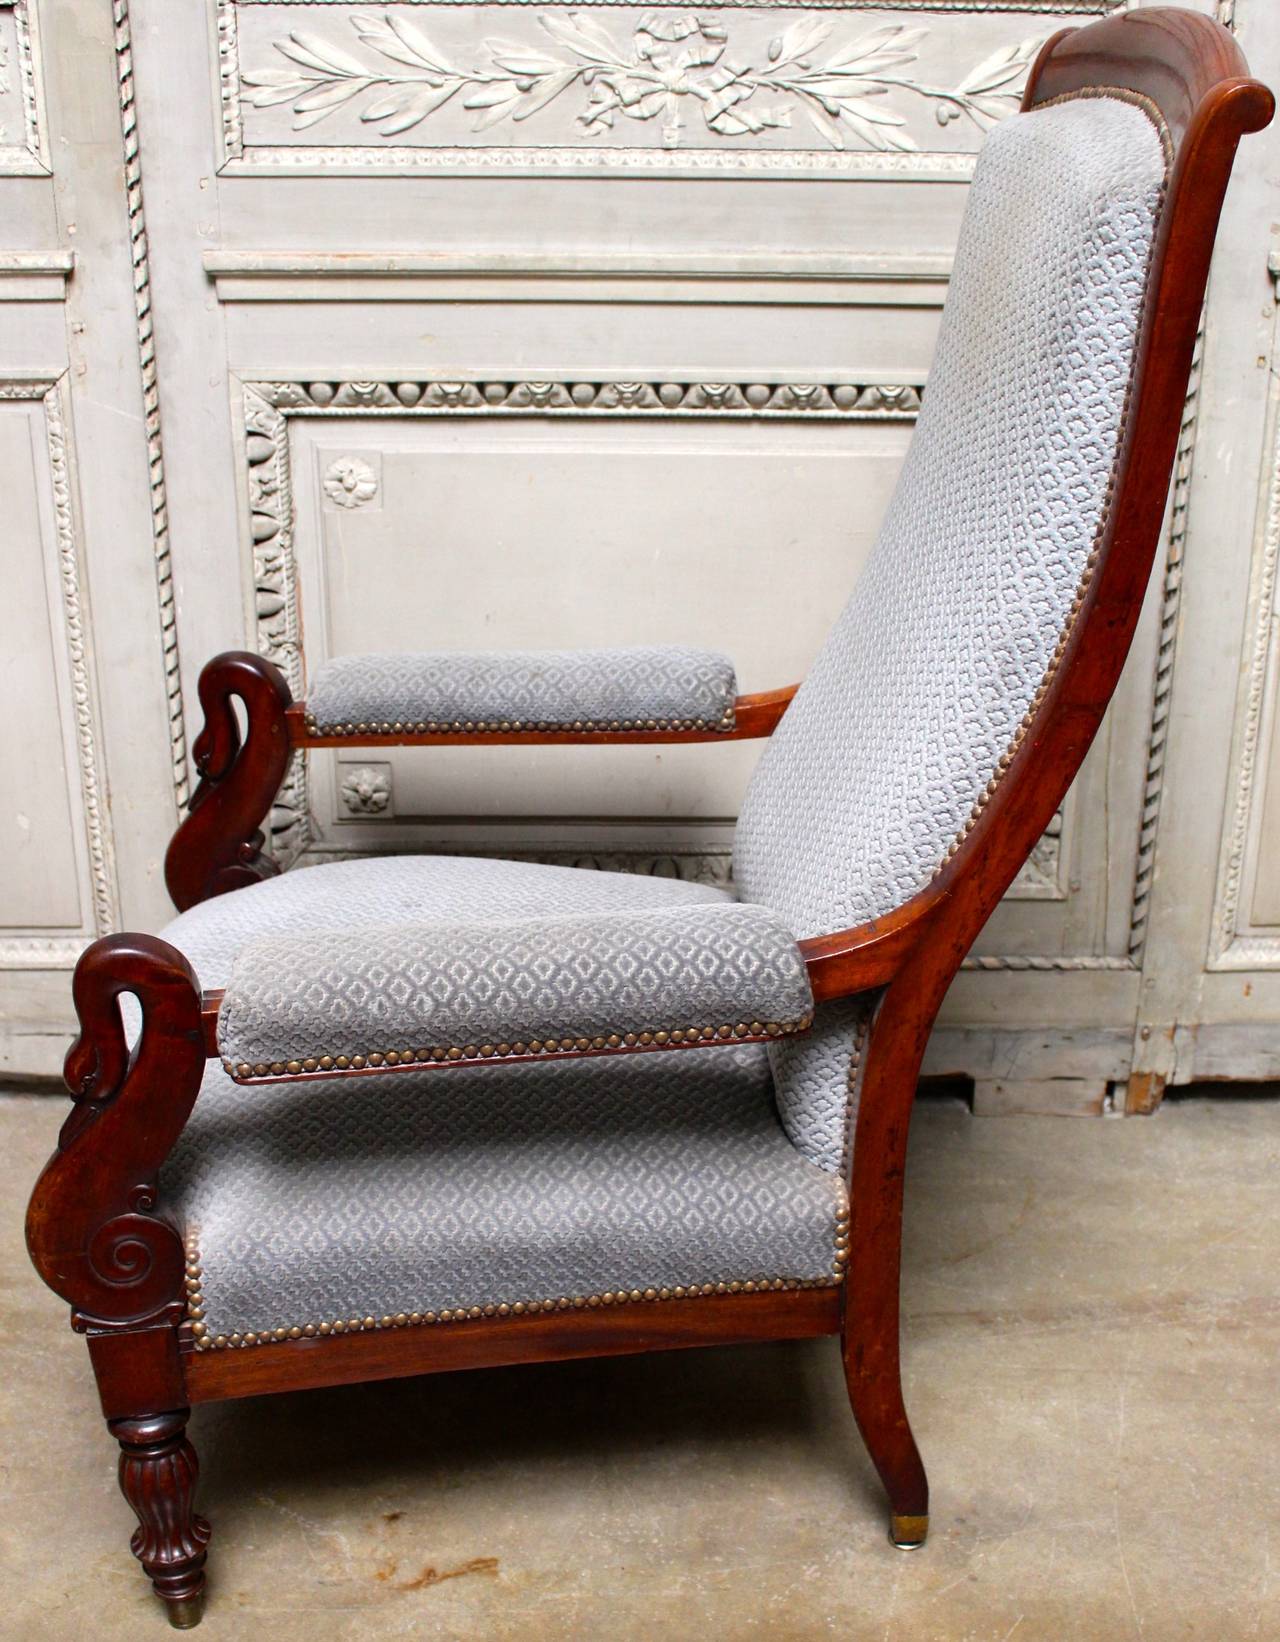 A French Charles X armchair in mahogany with swan motif.